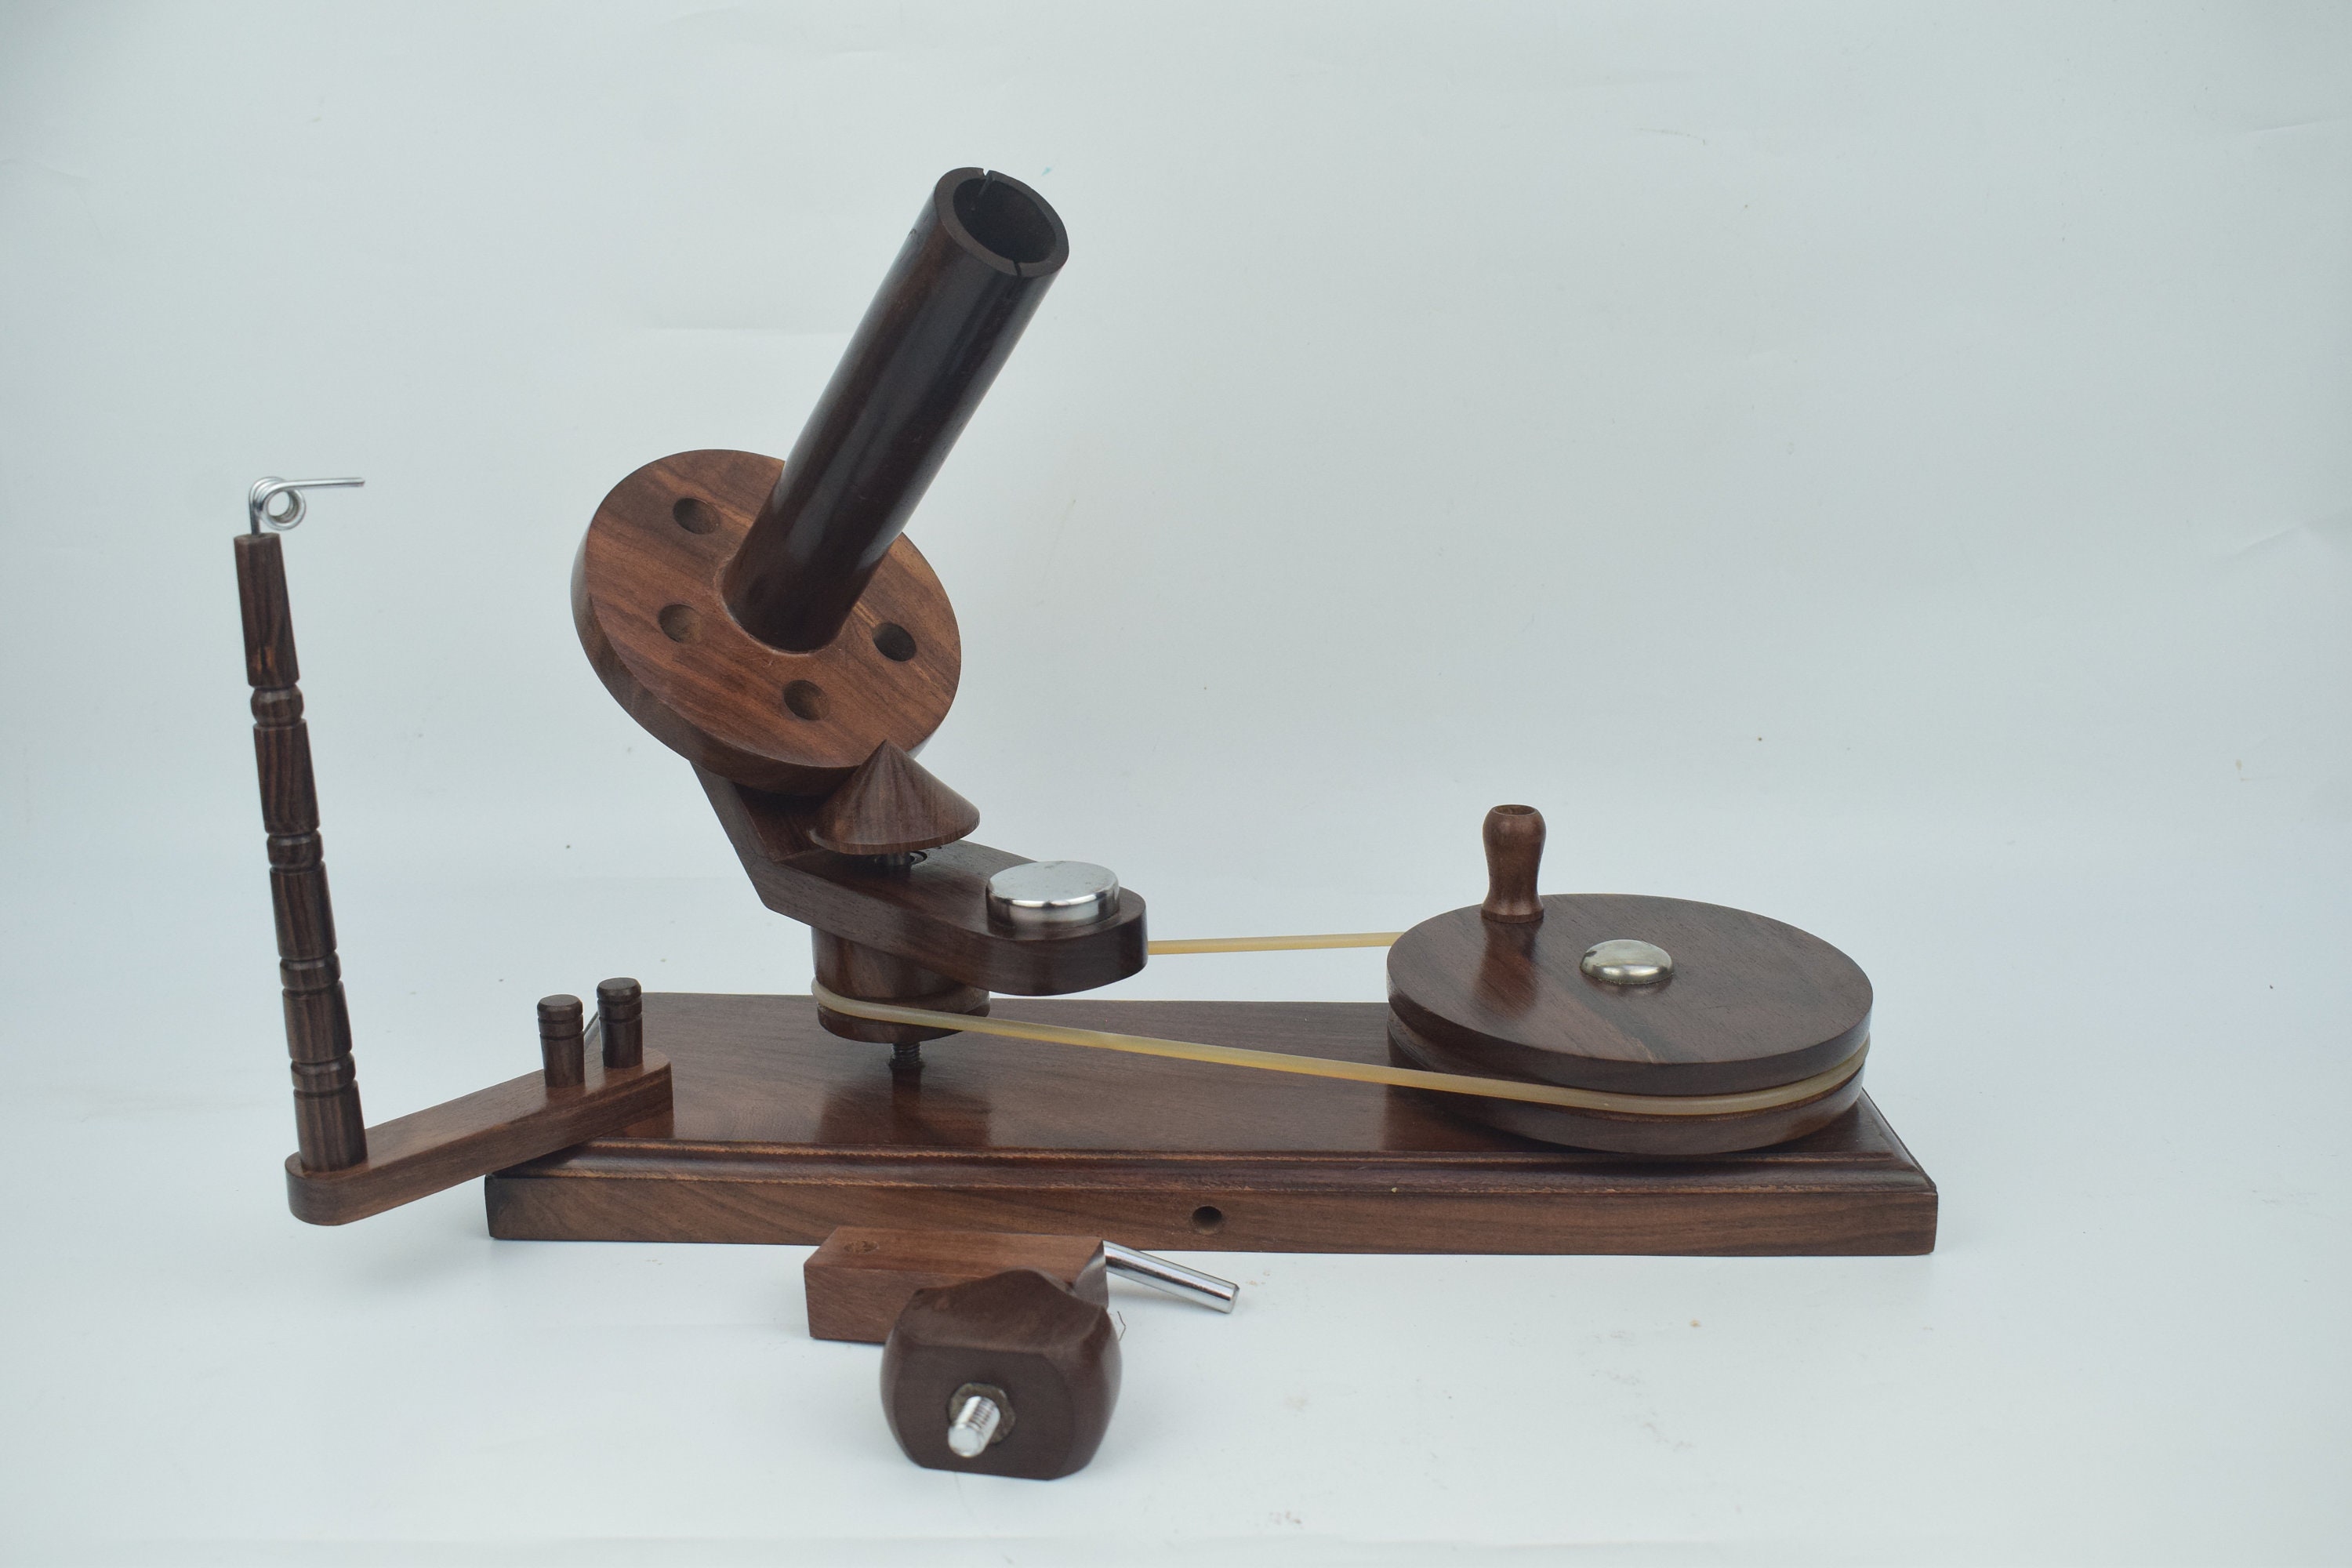 Wooden Ball Winder, Umbrella Swift Rosewood Table Top Yarn Winder, Hand  Operated Wool String Winder, Knitting Tool for Swift Winding Lines 